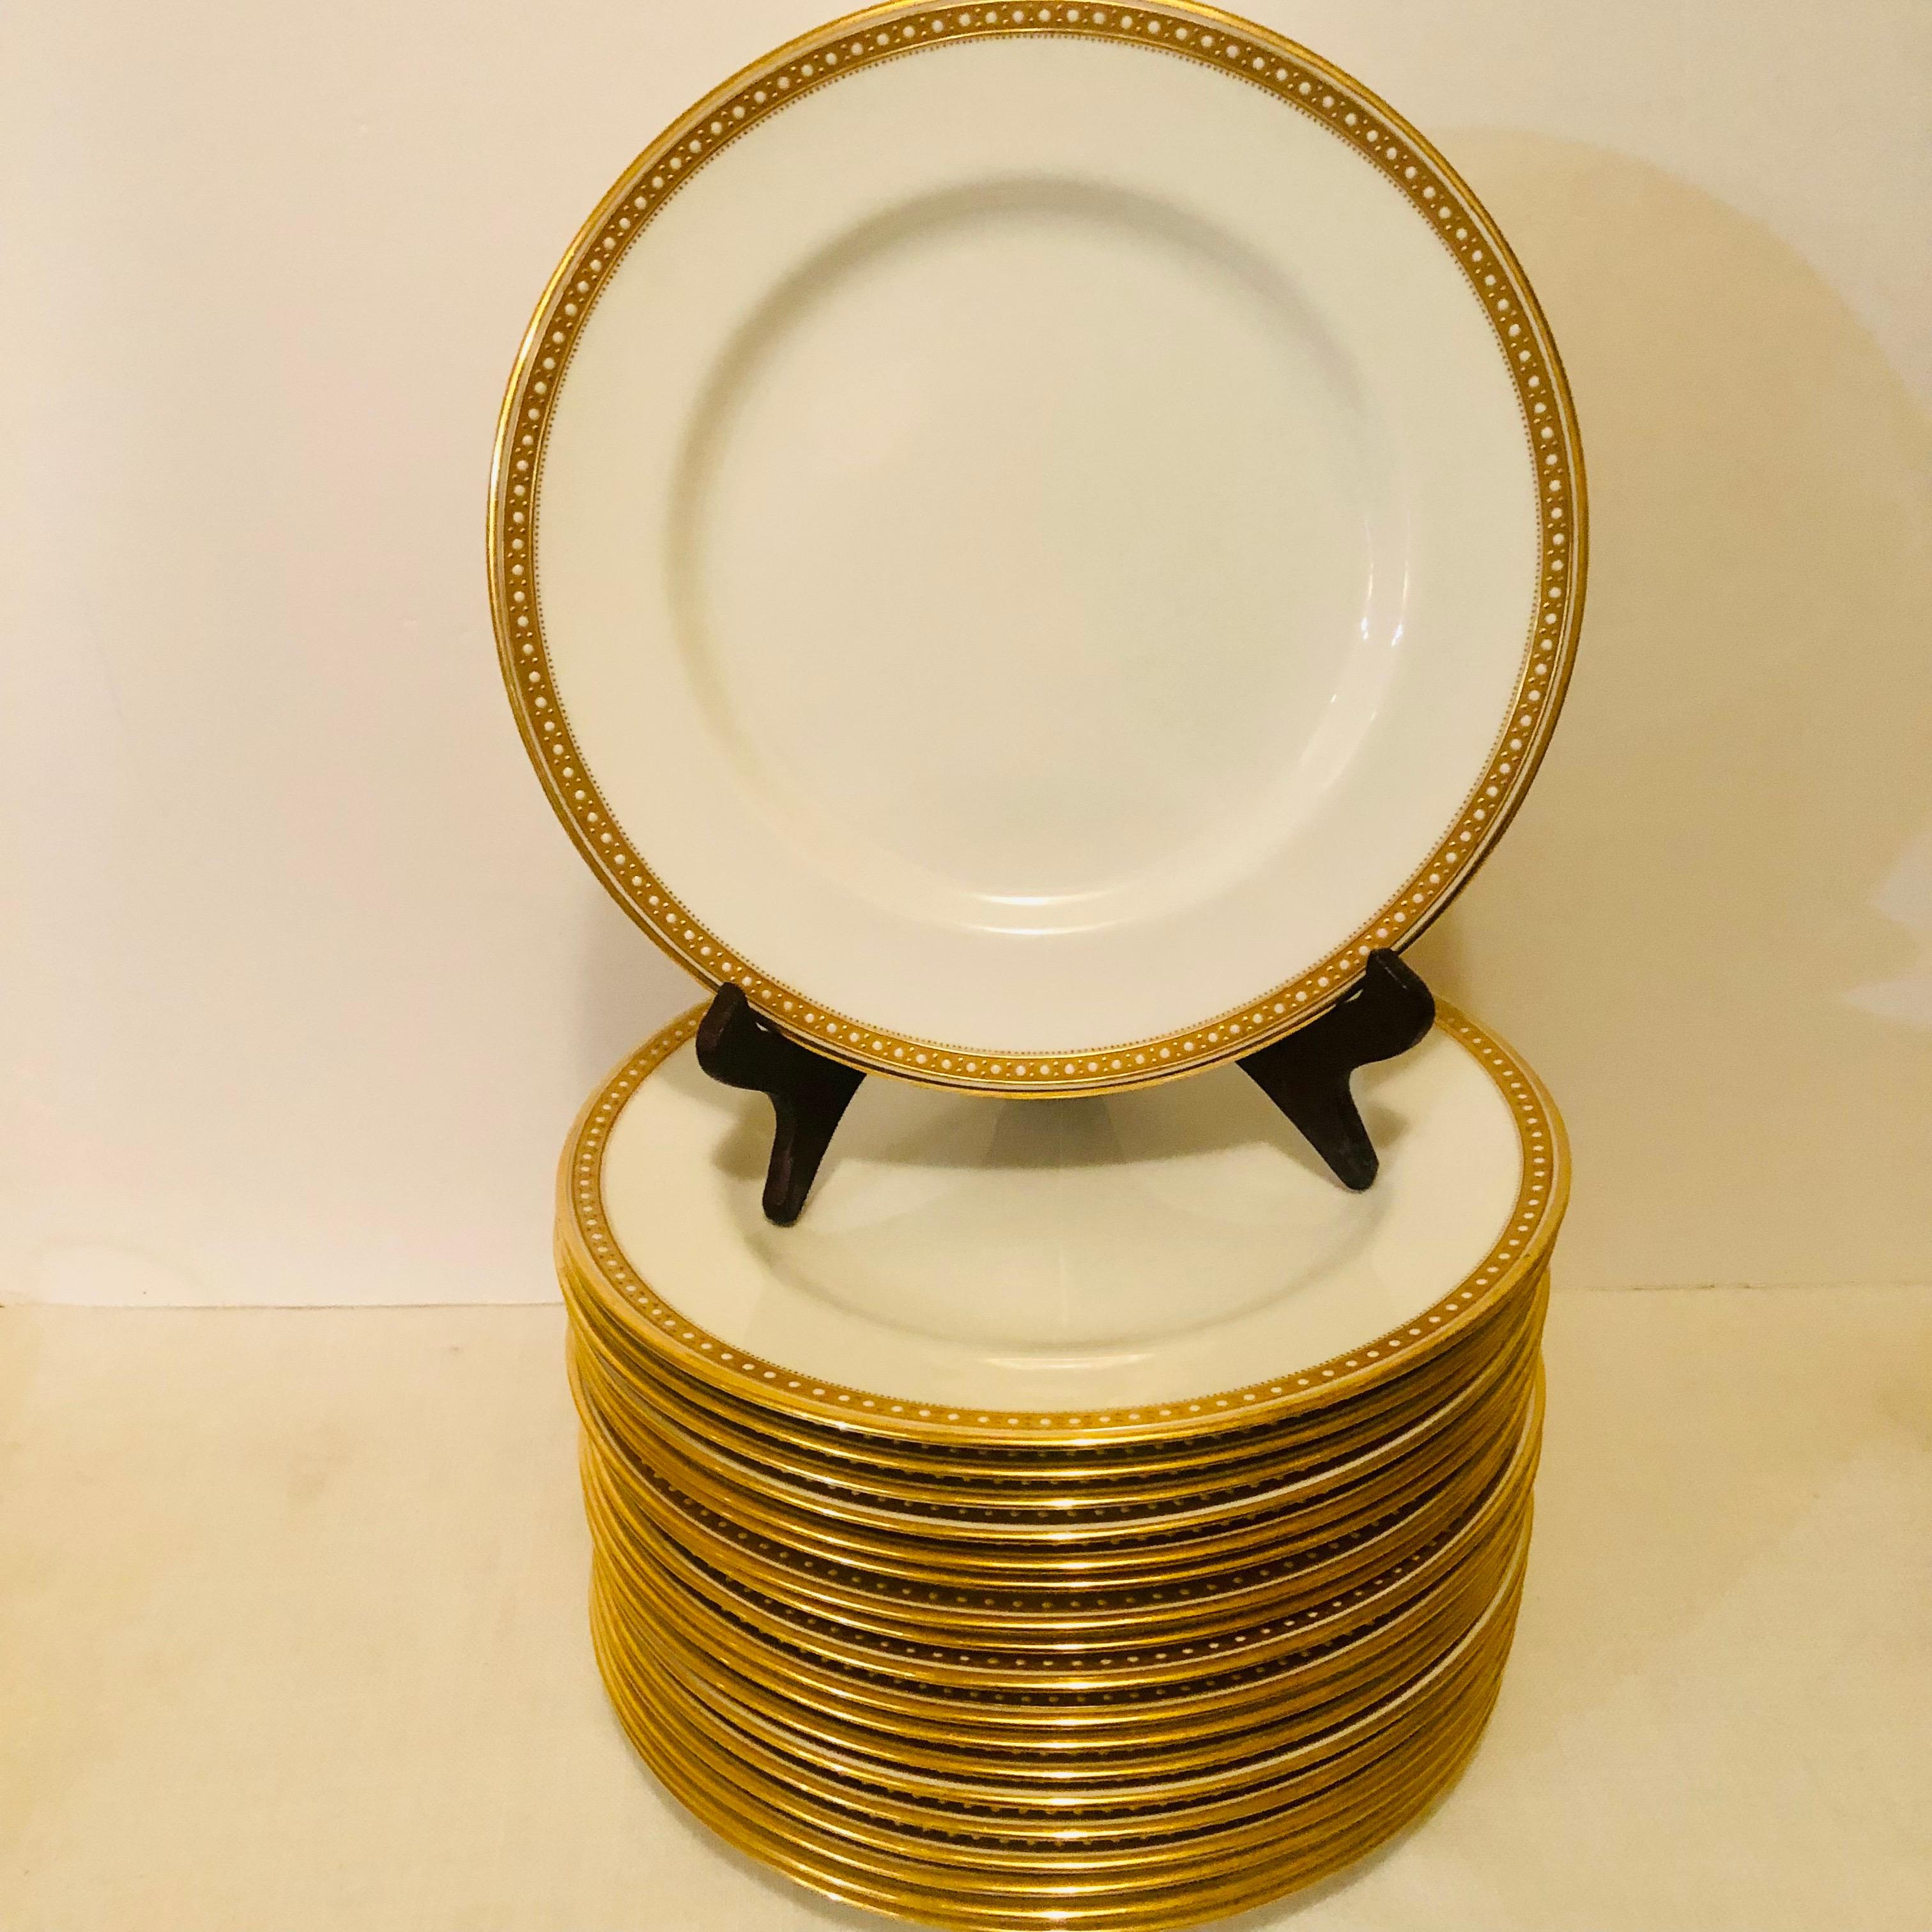 Gilt Set of 19 Copeland Spode Dinner Plates With Gold Borders and White Jeweling 